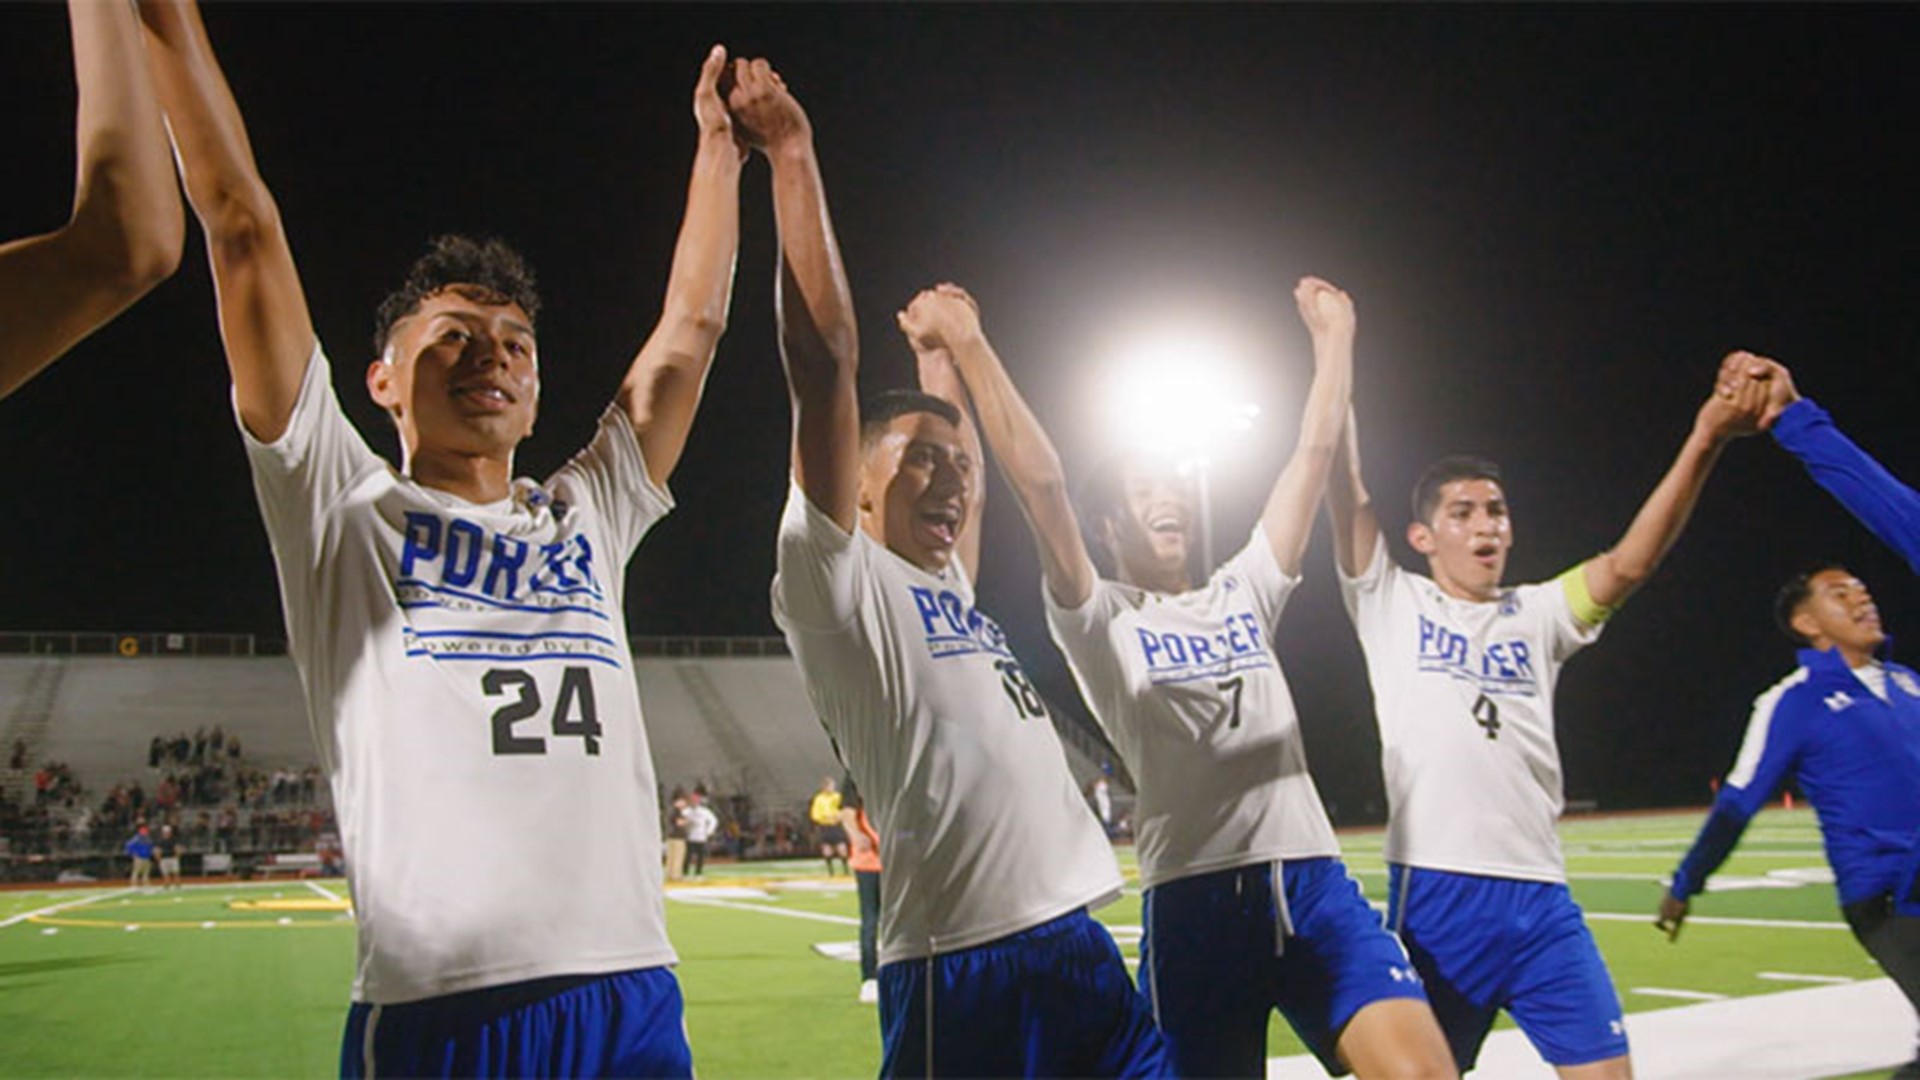 In the border's shadow, school spirit and a drive to succeed thrive on a storied soccer team. Meet the players who give everything on the field and even more off it.